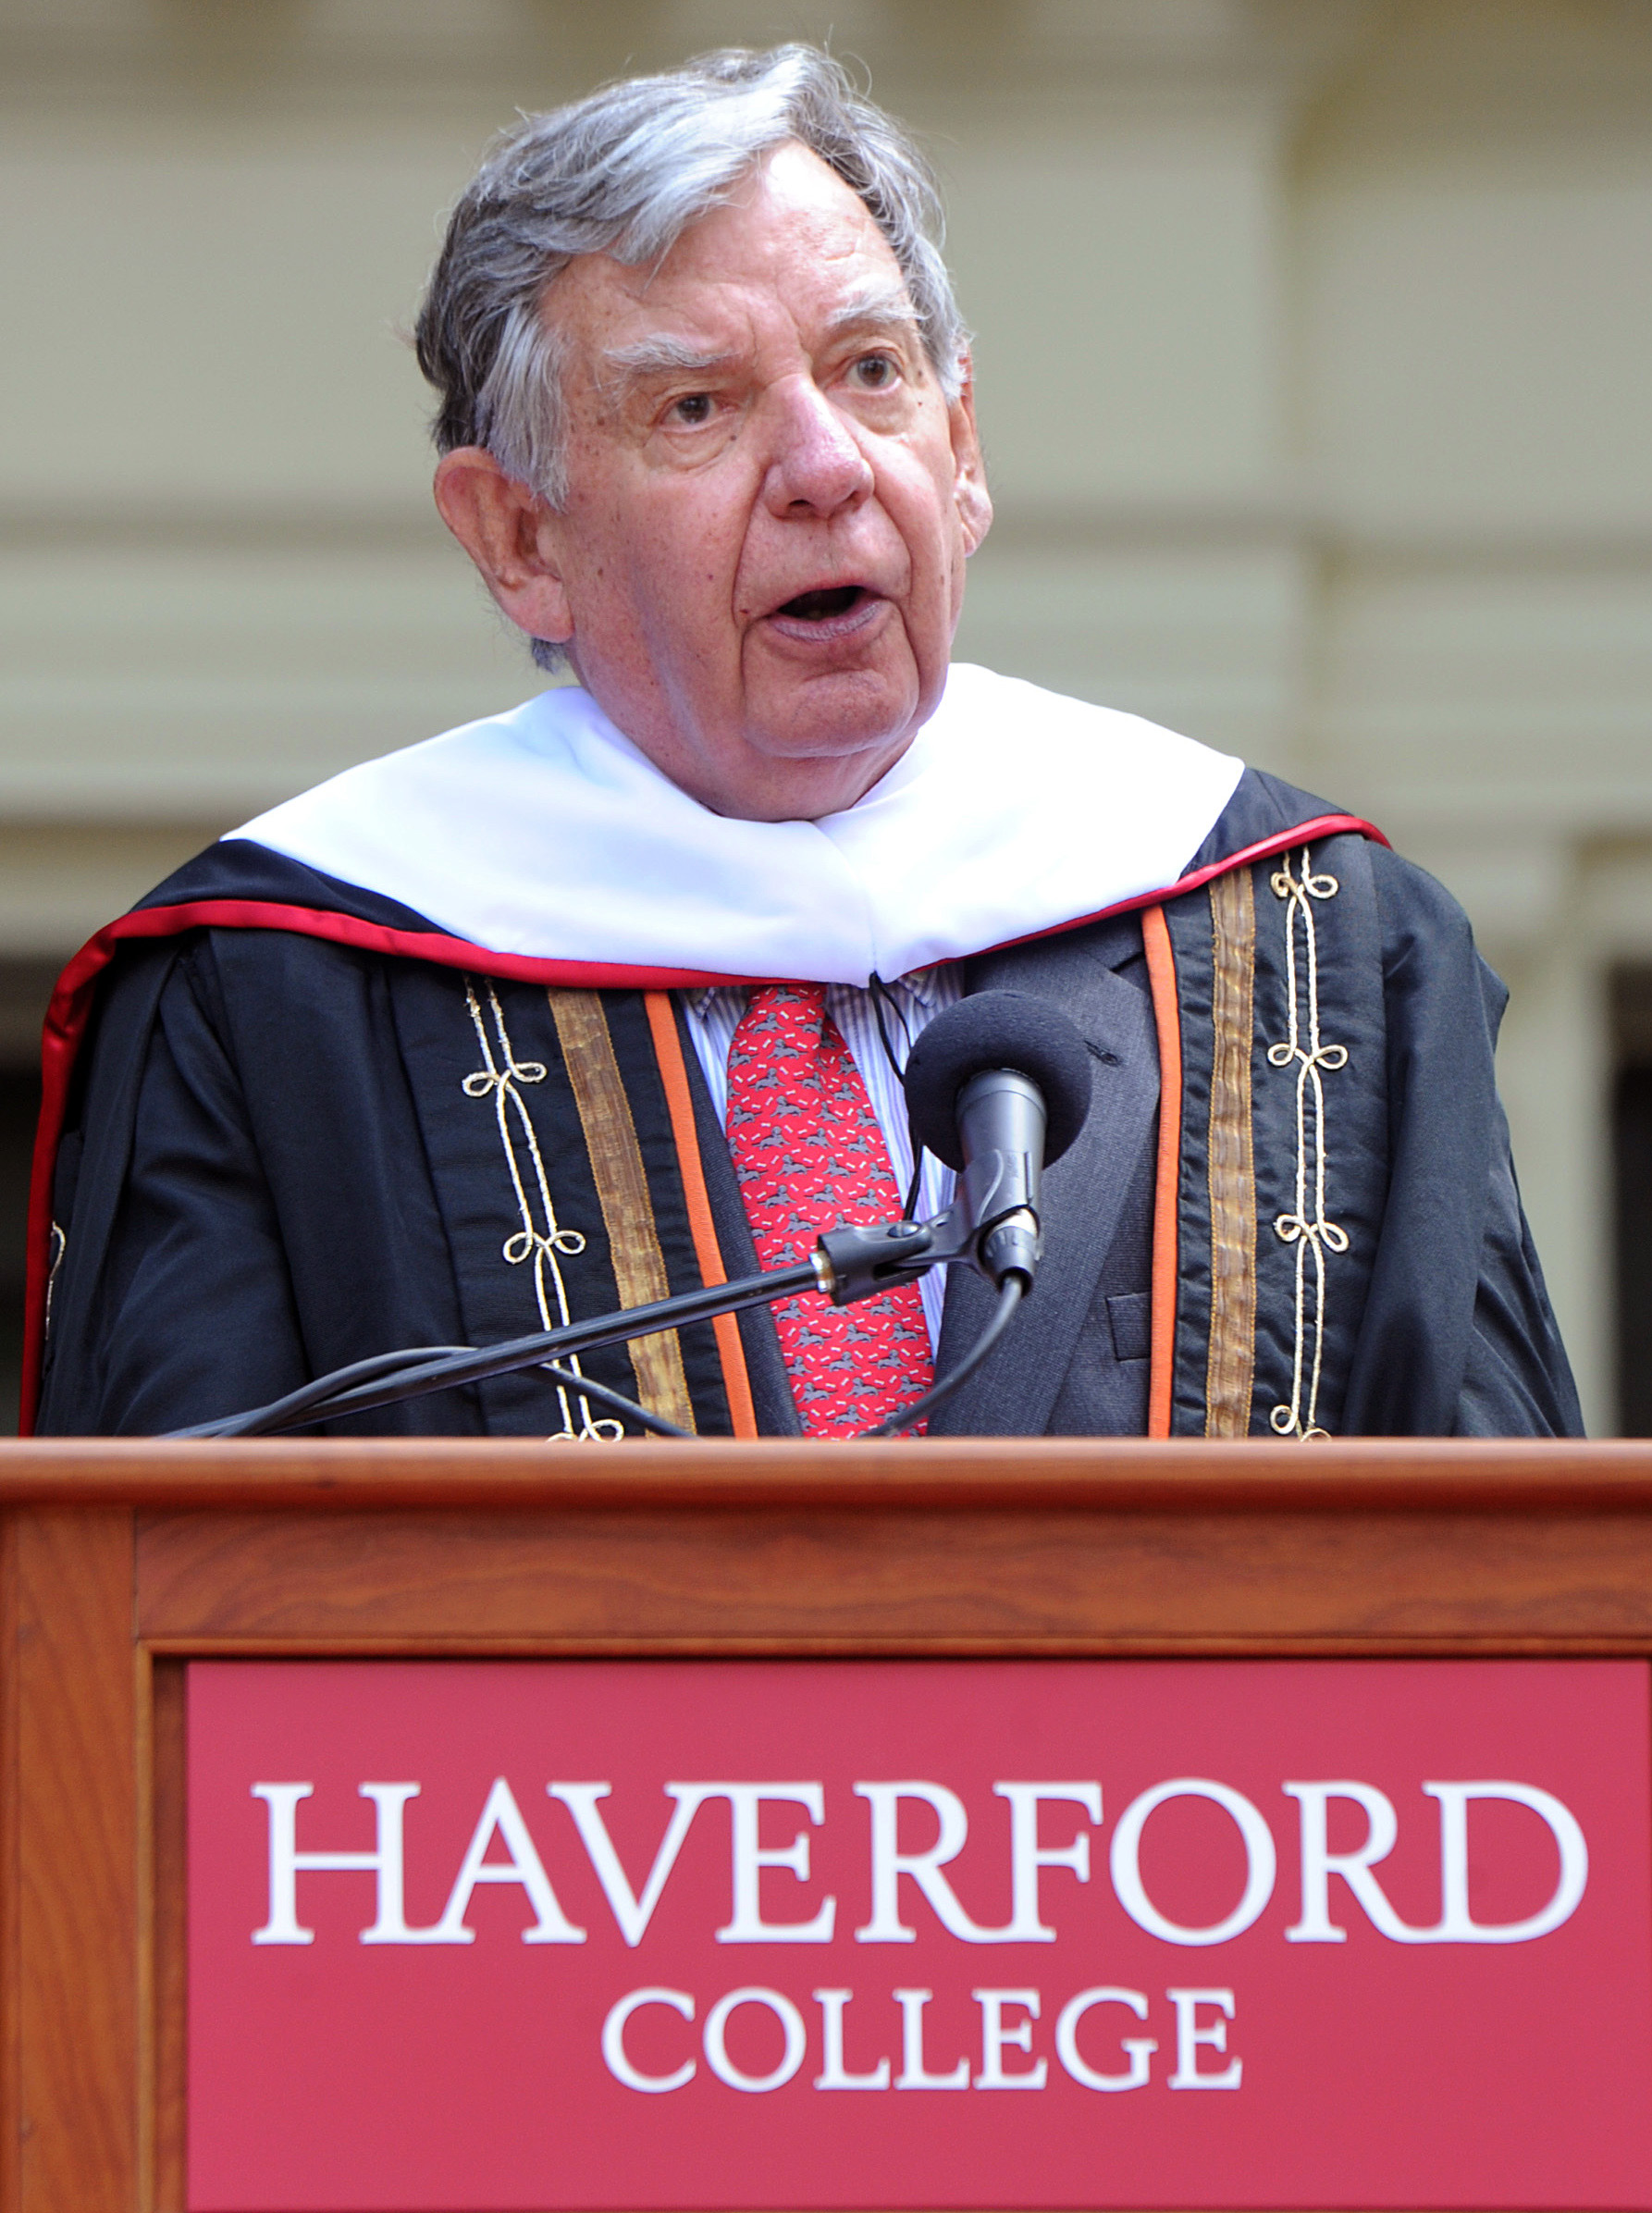 William Bowen, former president of Princeton University, delivers his second commencement speech to the 2014 graduates of Haverford College, on May 18, 2014. (Clem Murray—The Philadelphia Inquirer/AP)